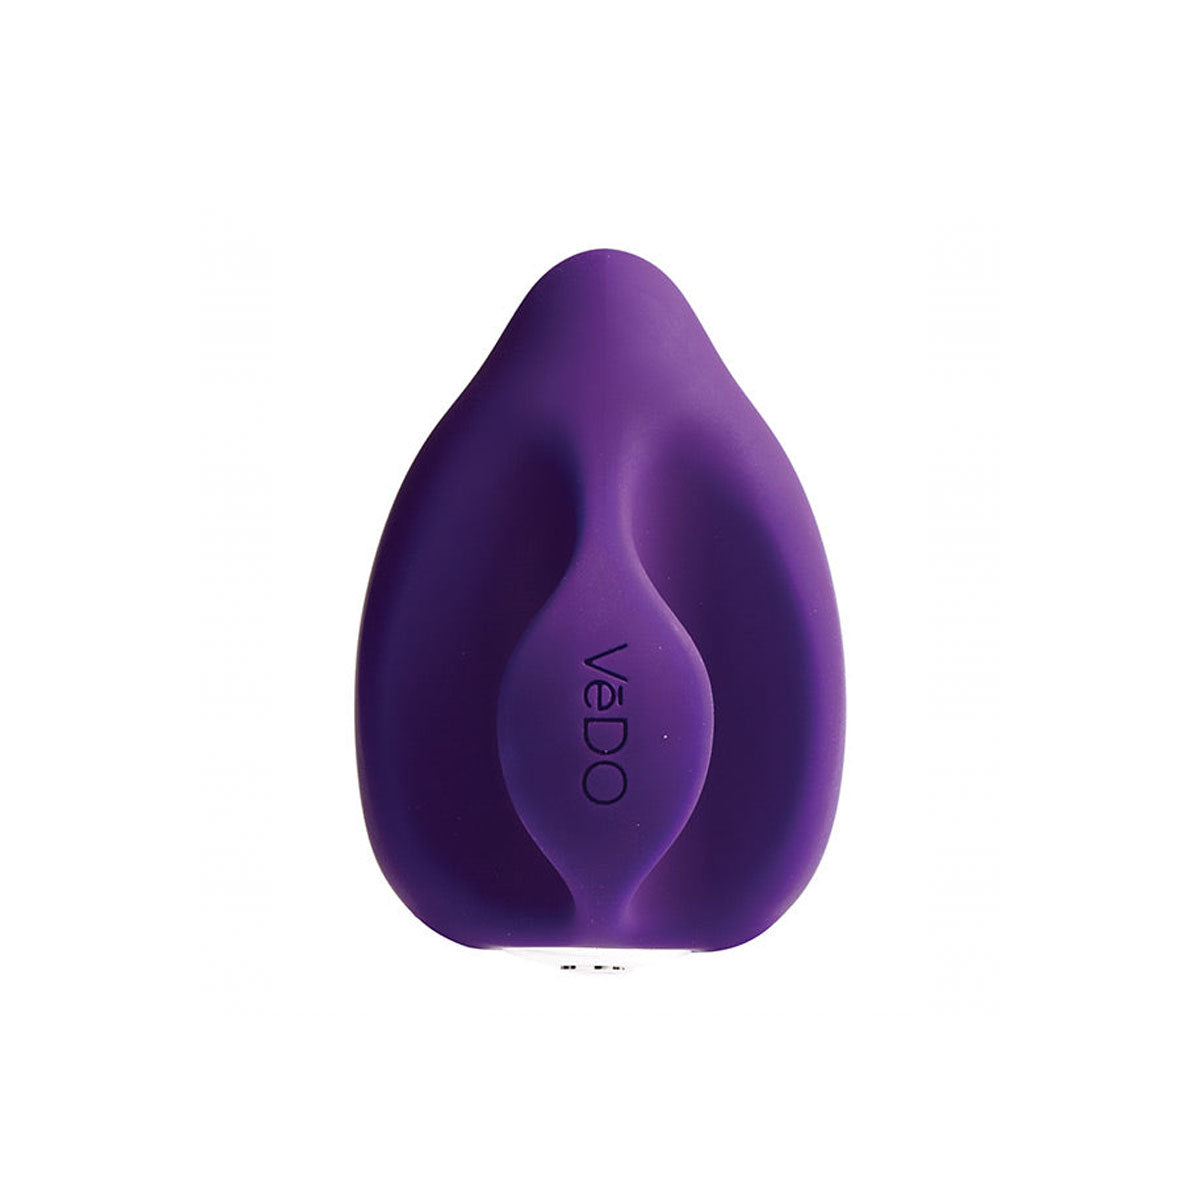 Purple silky-smooth silicone finger vibrator with a handle for easy grip Nudie Co